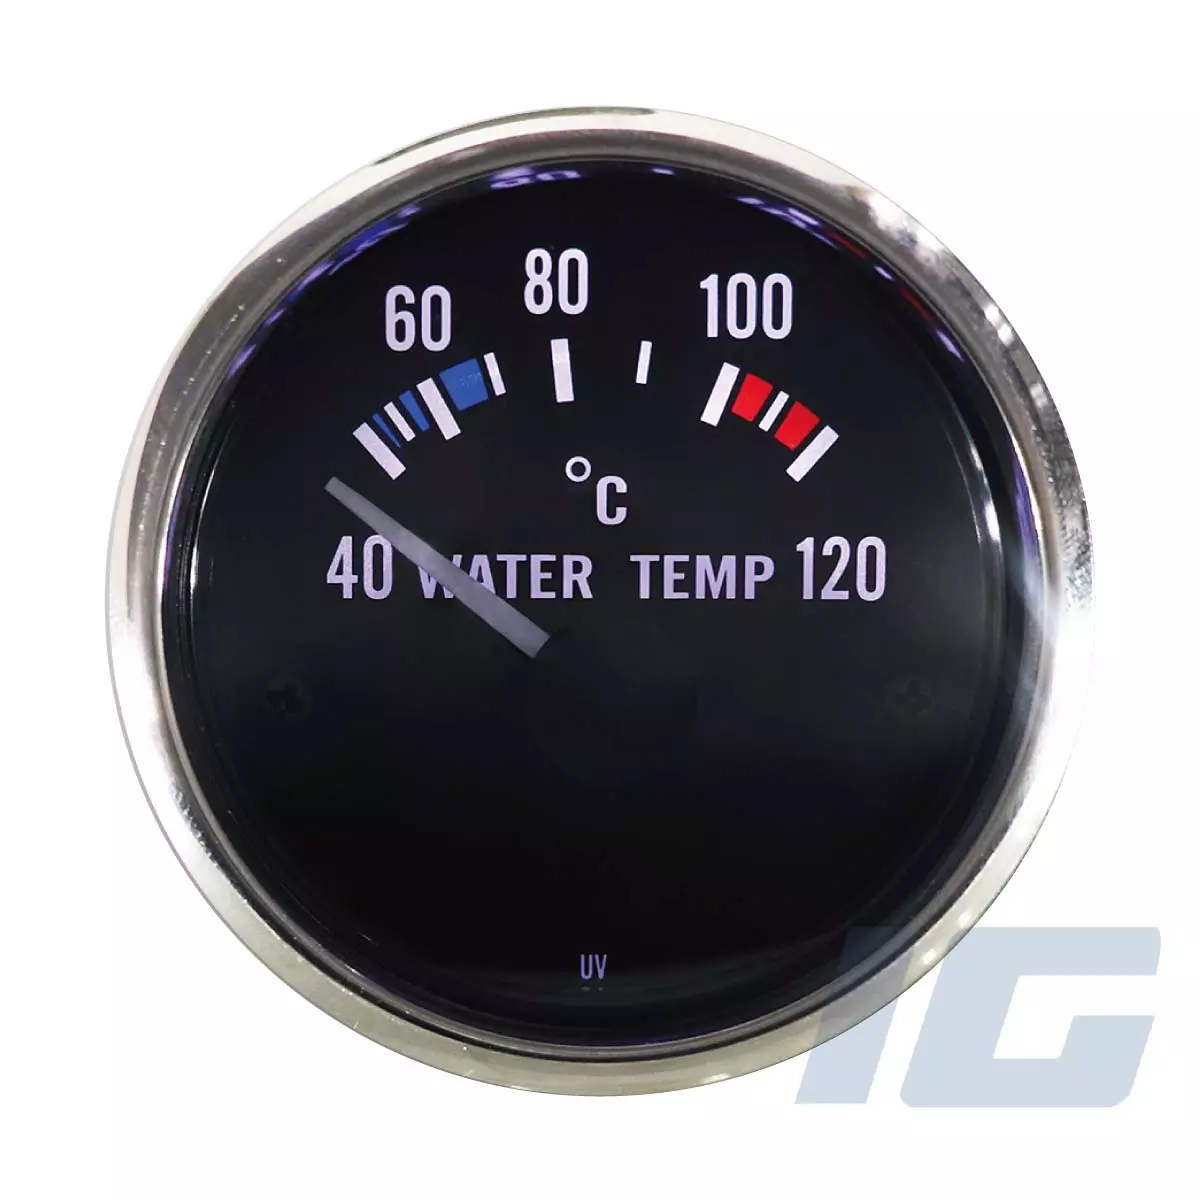 igauge, MGS Series, 52mm, Black Face, Aftermarket, Marine, Gauge, Boat, Outboard, Water Temperature, kit